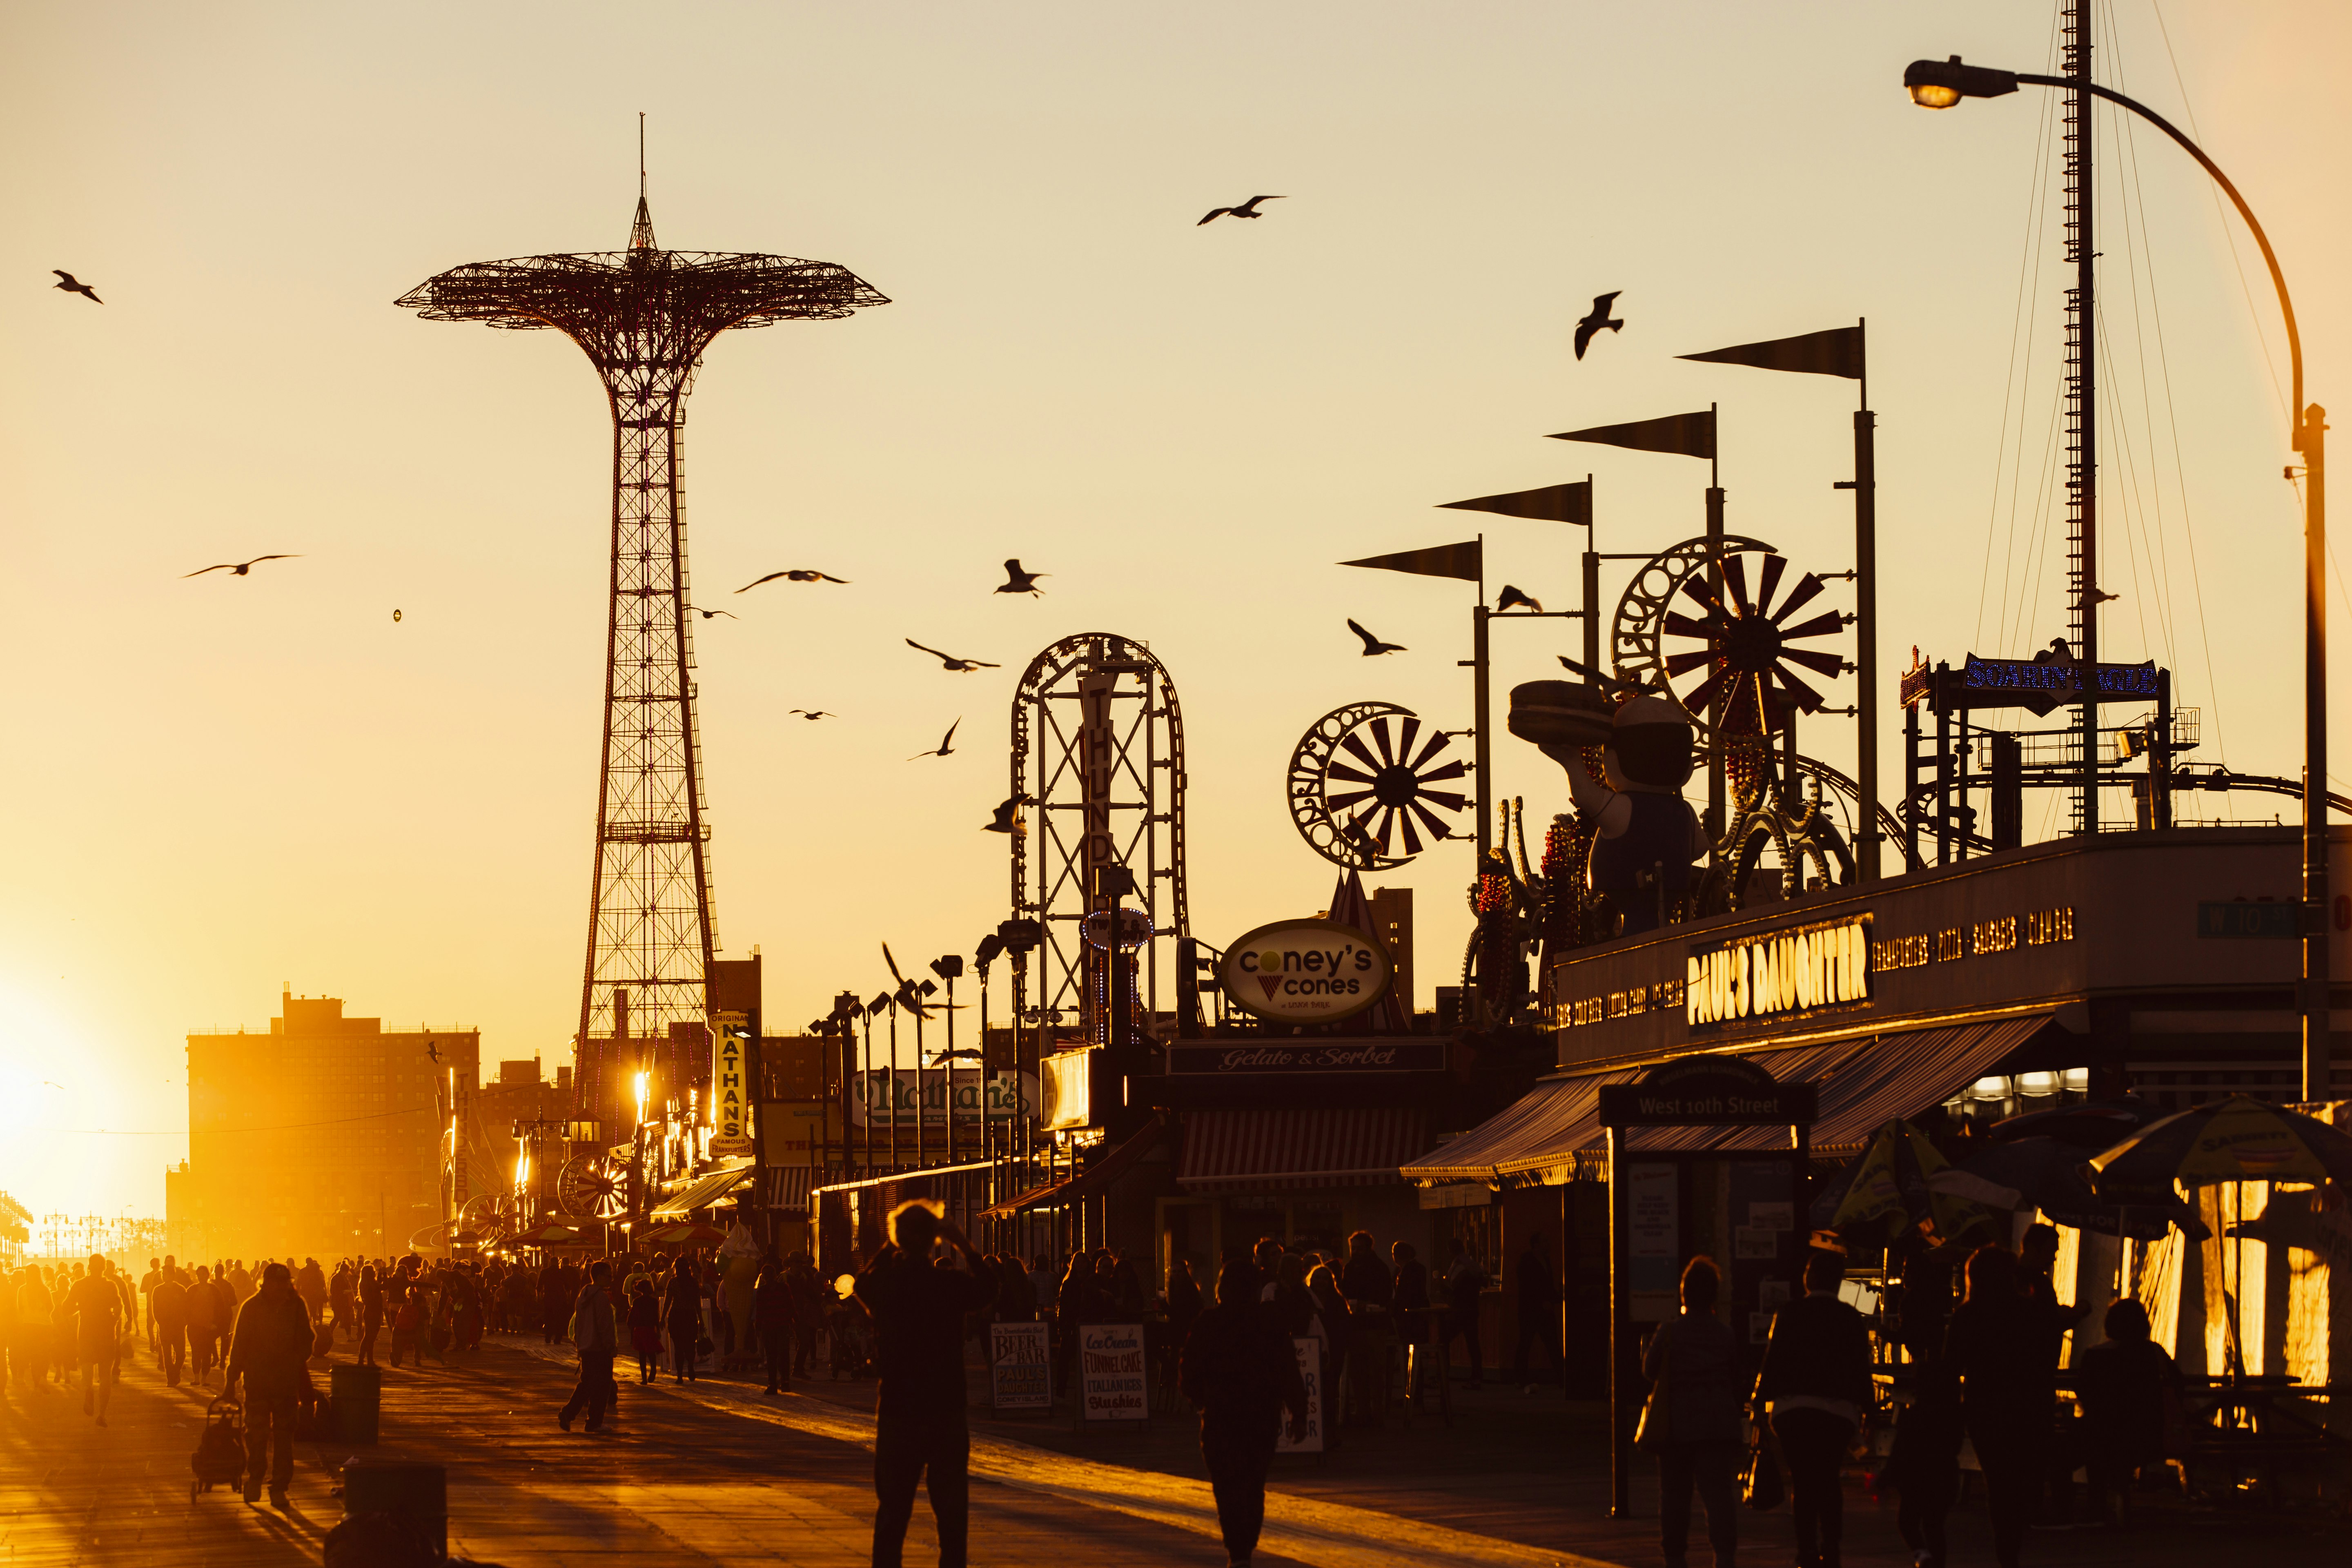 The attractions of Coney Island are silhouetted along the Boardwalk at sunset, Brooklyn, New York City, NY, USA